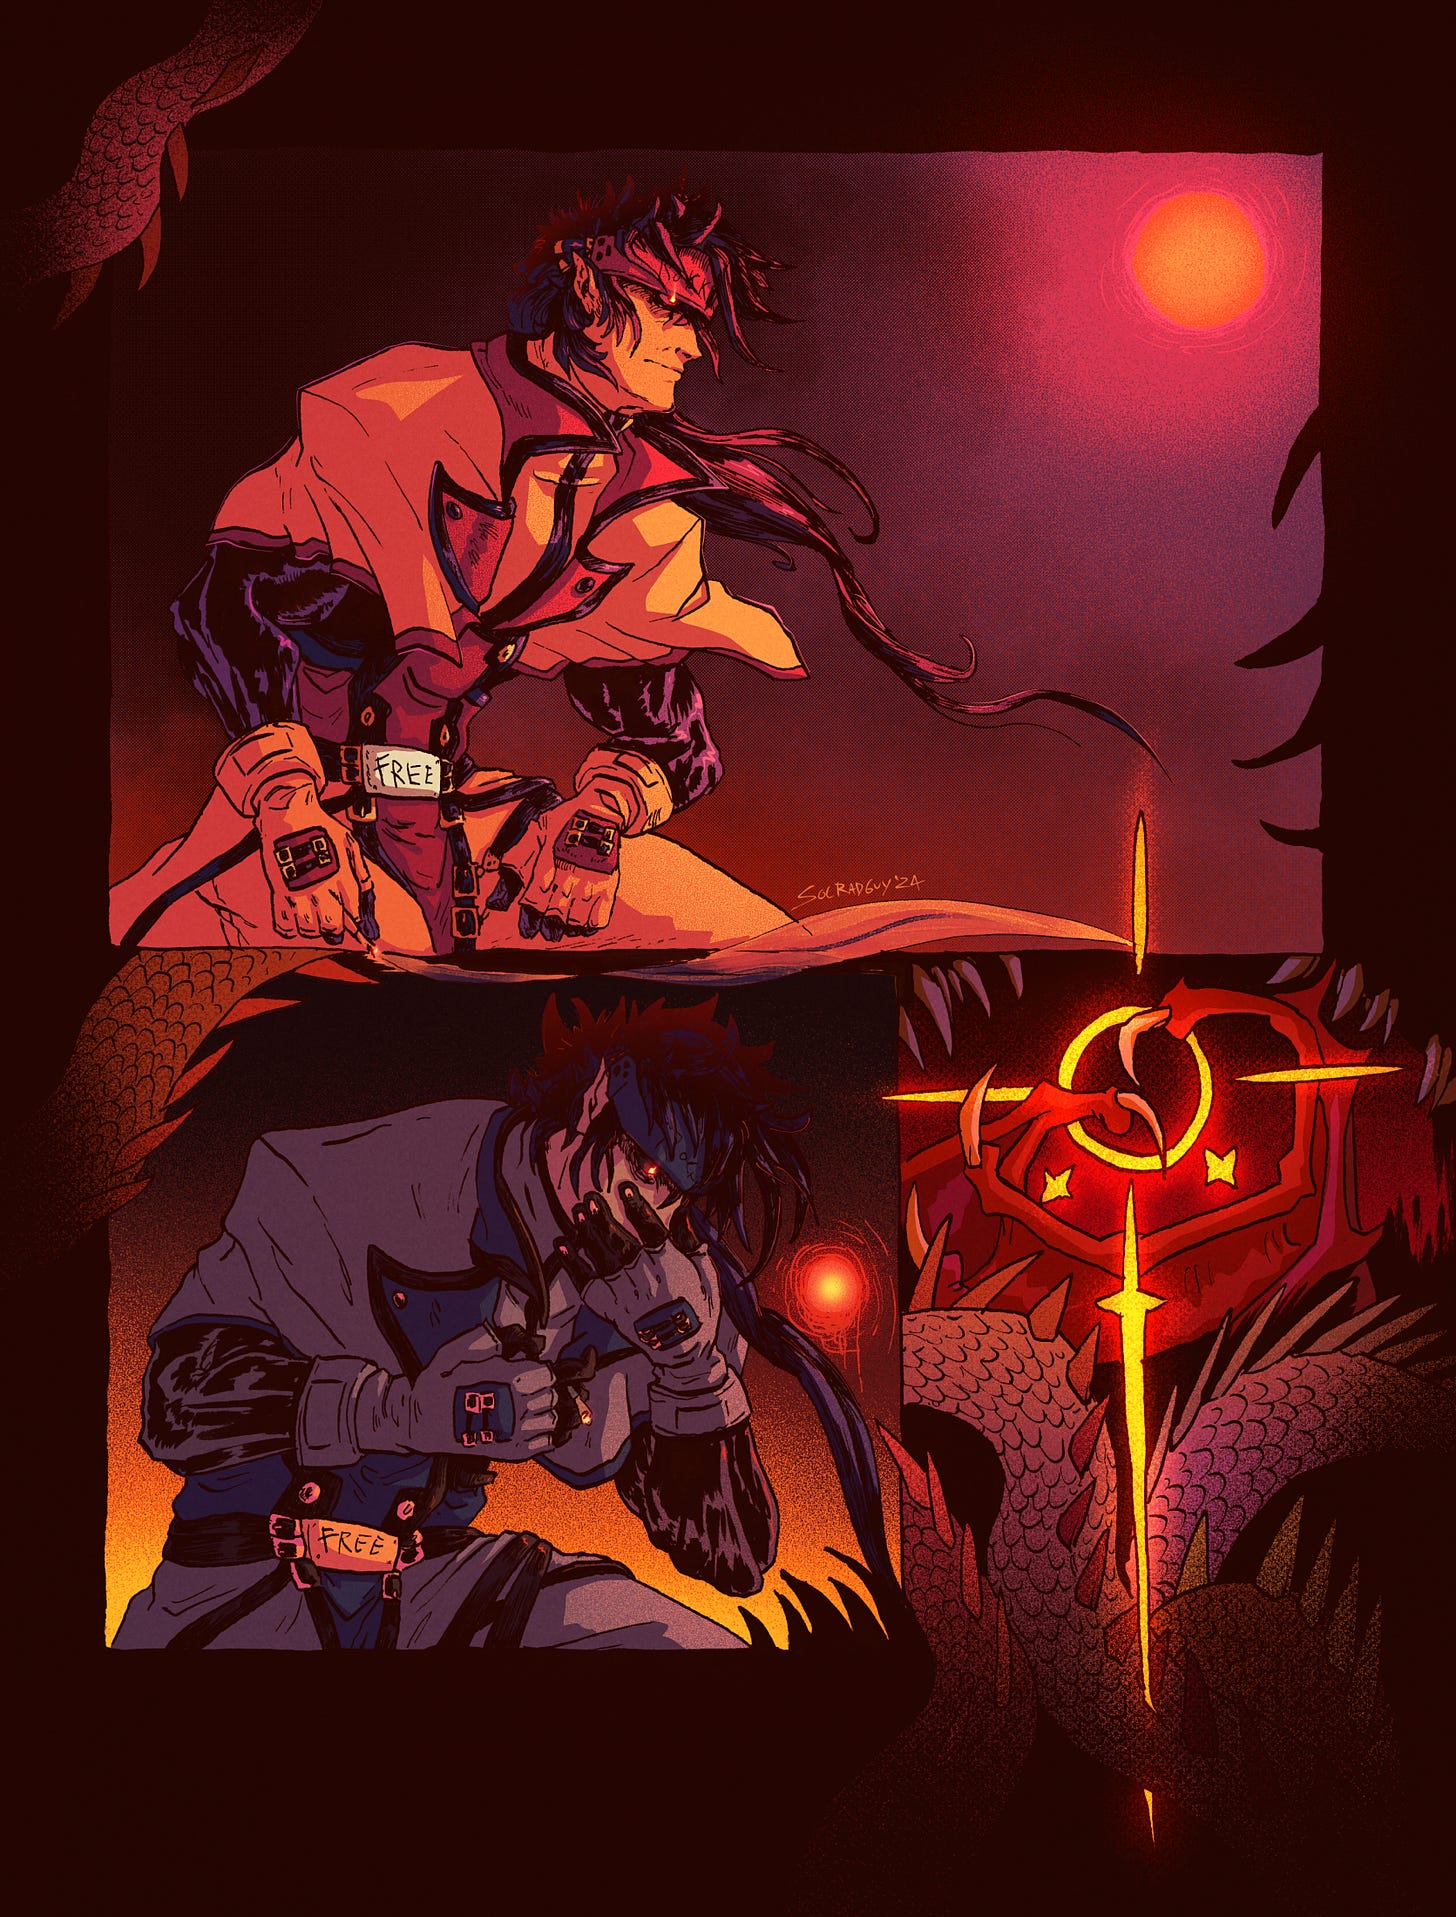 A brightly colored and textured mixed analog and digital media illustration. The top panel has Order Sol looking off into the dark sunset while a cigarette burns in his hand. Below this is a smaller panel where the sky has darkened and his palette has become blue. His eyes are wide and his expression tense or anxious. The composition is framed by thorny dragon tails and spikes.